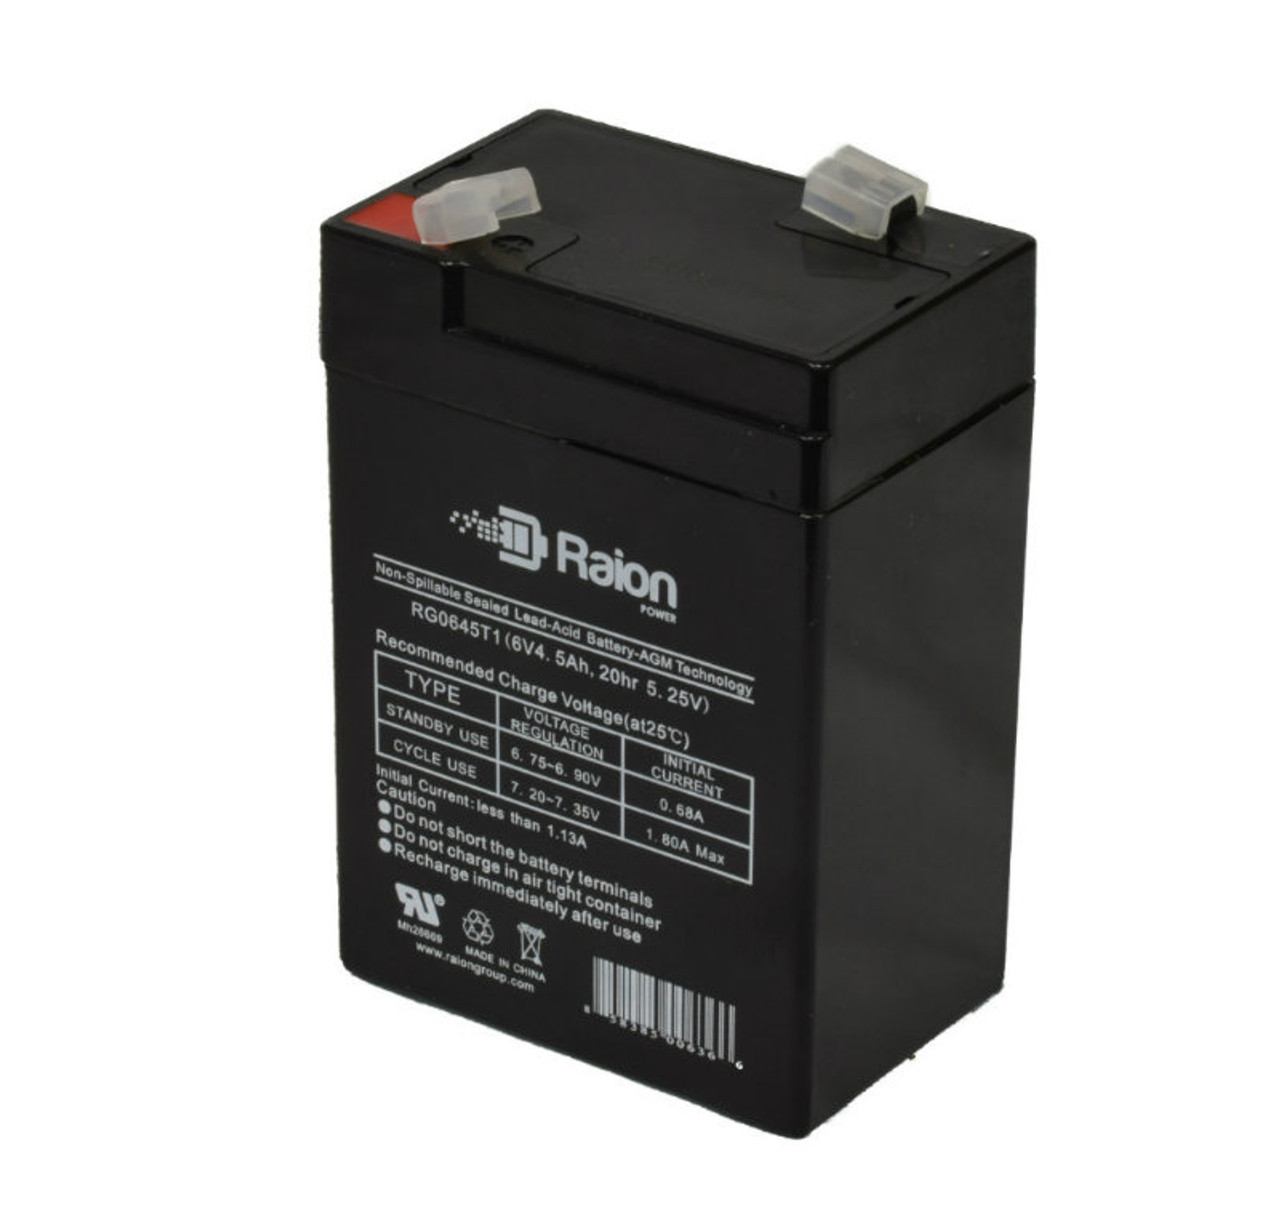 Raion Power RG0645T1 6V 4.5Ah Replacement Battery Cartridge for Power Energy GB6-6